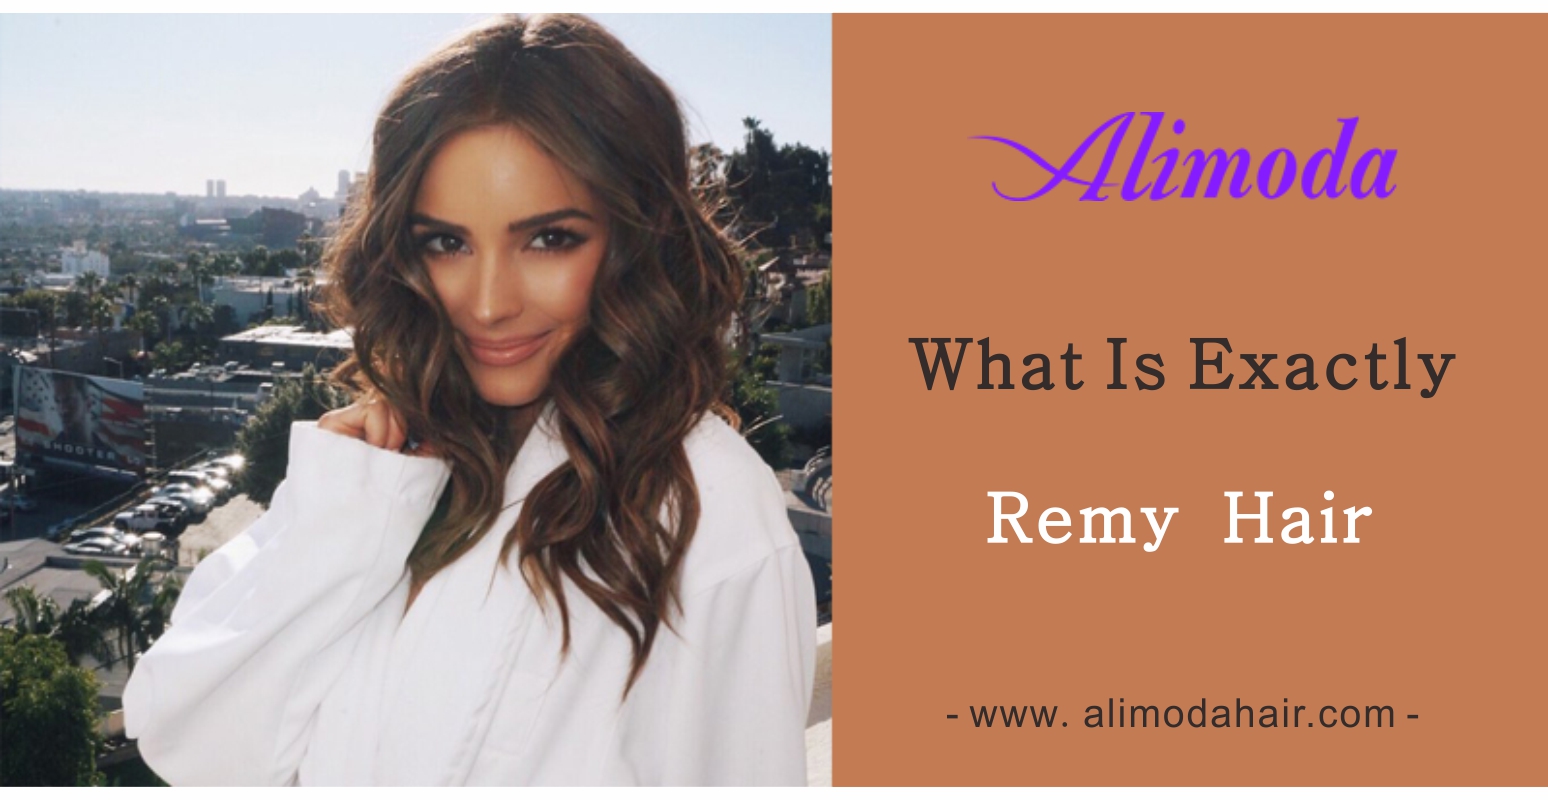 What is Remy hair